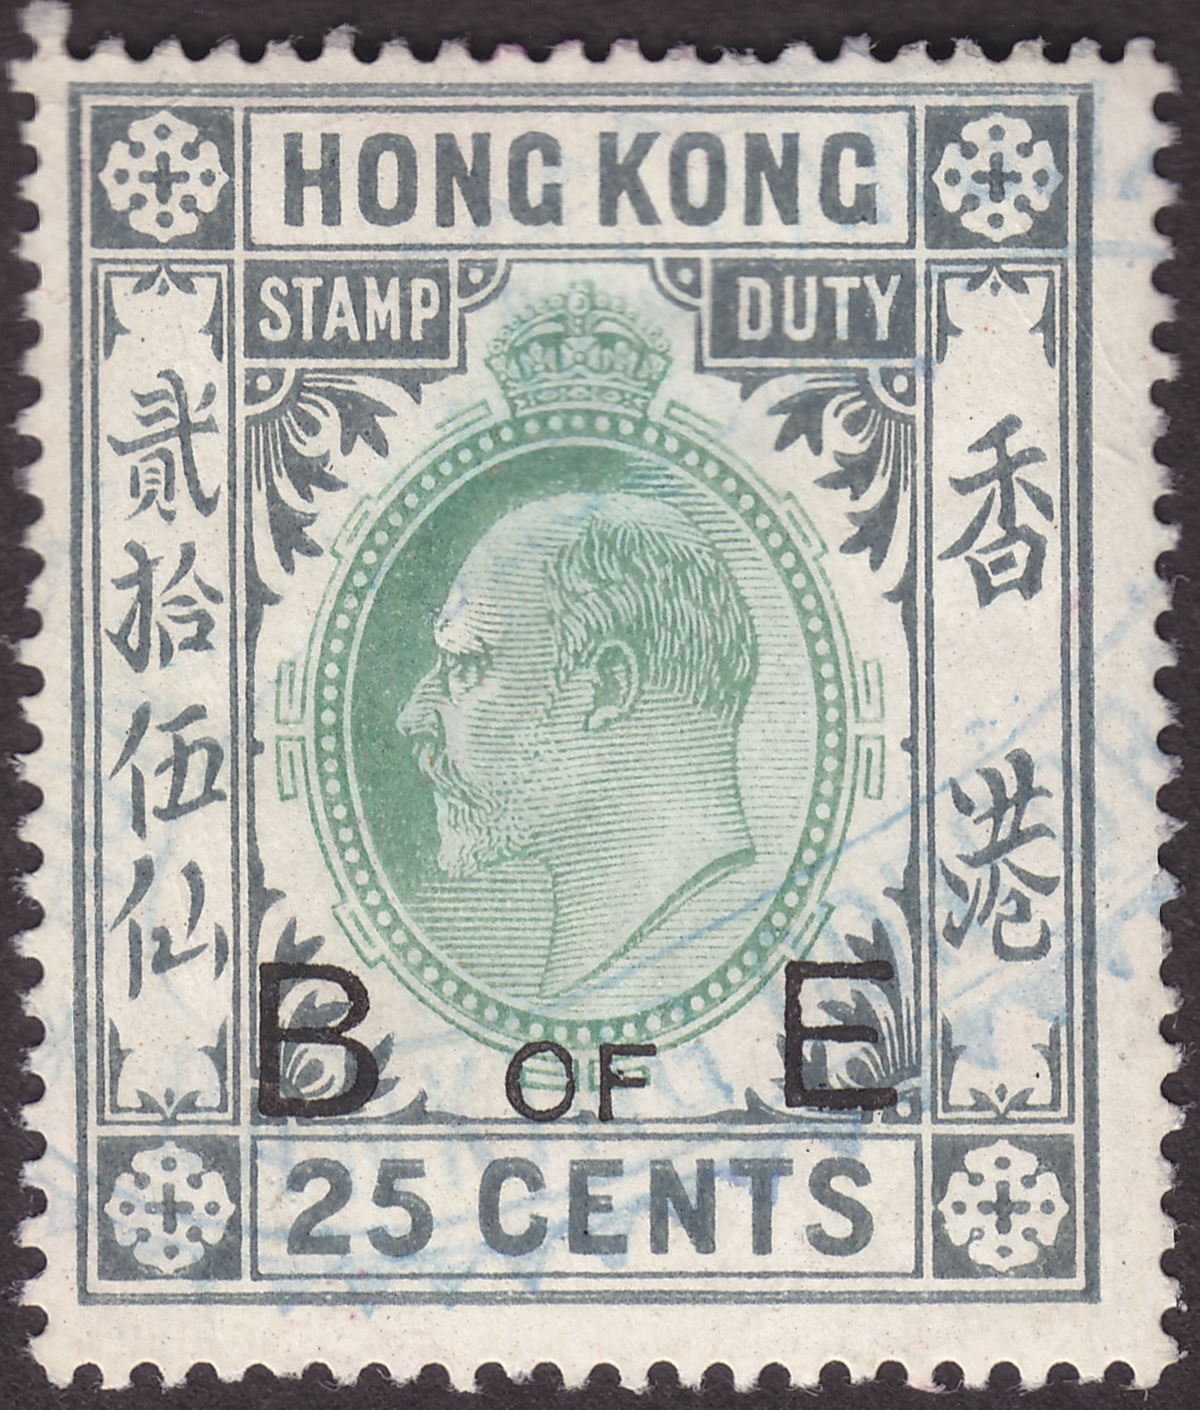 Hong Kong 1907 KEVII Revenue Bill of Exchange 25c Overprint Used BF79A with thin